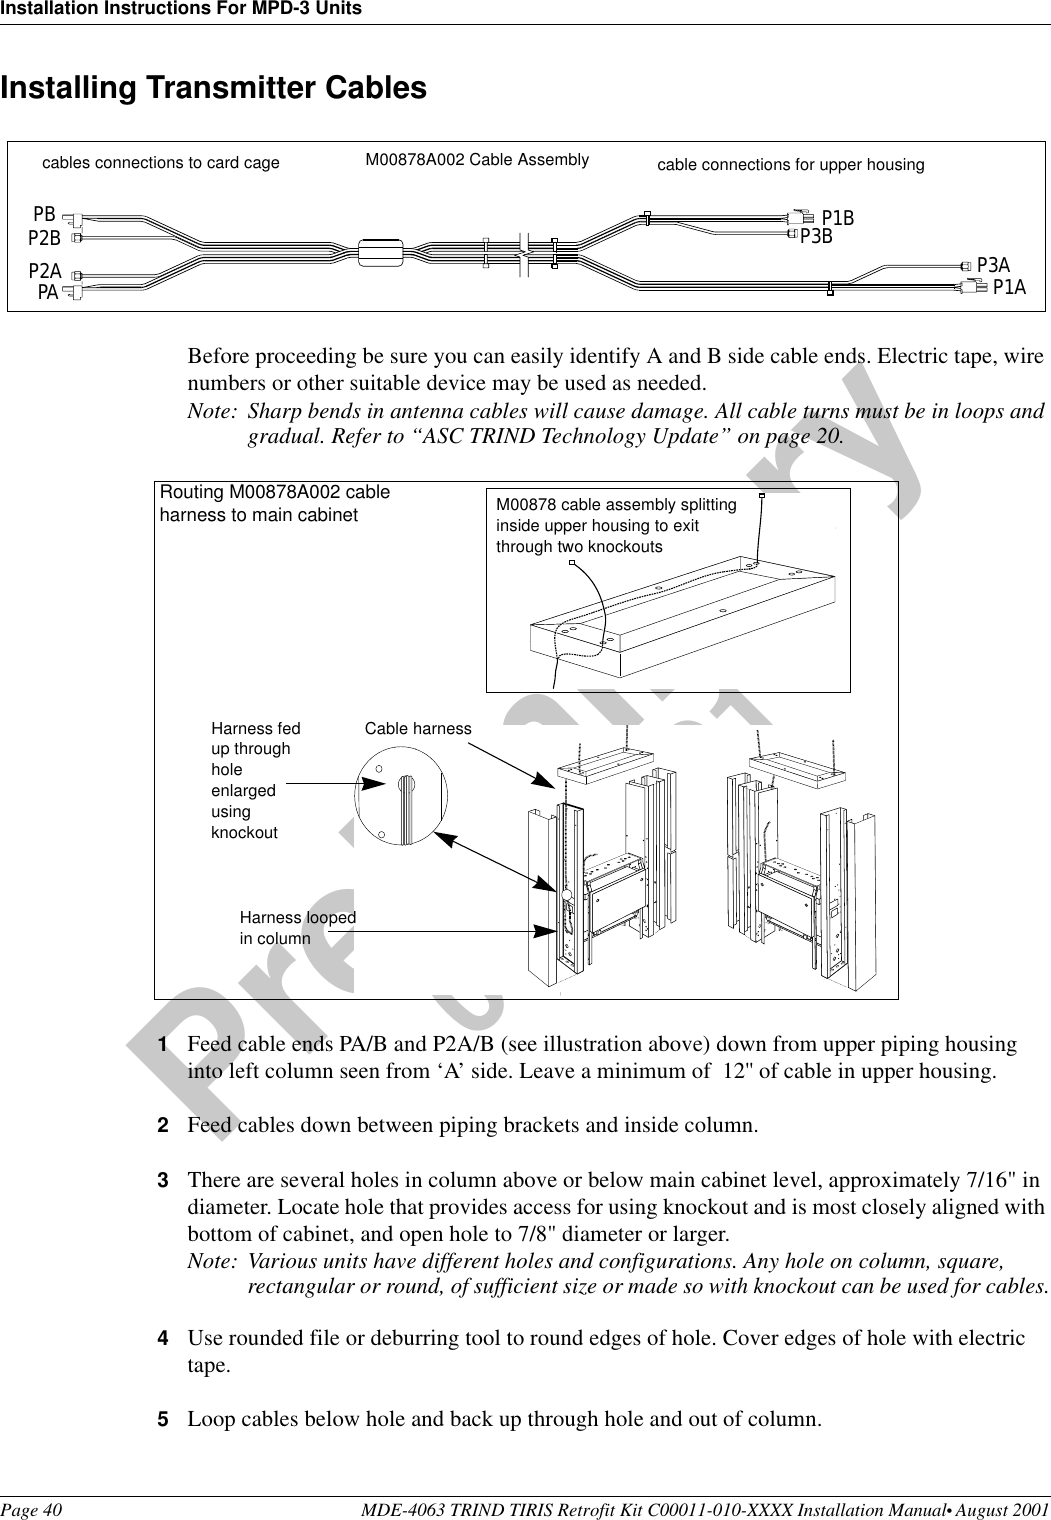 Installation Instructions For MPD-3 UnitsPage 40 MDE-4063 TRIND TIRIS Retrofit Kit C00011-010-XXXX Installation Manual• August 2001Preliminary08-24-01Installing Transmitter CablesBefore proceeding be sure you can easily identify A and B side cable ends. Electric tape, wire numbers or other suitable device may be used as needed.Note: Sharp bends in antenna cables will cause damage. All cable turns must be in loops and gradual. Refer to “ASC TRIND Technology Update” on page 20. 1Feed cable ends PA/B and P2A/B (see illustration above) down from upper piping housing into left column seen from ‘A’ side. Leave a minimum of  12&apos;&apos; of cable in upper housing.2Feed cables down between piping brackets and inside column.3There are several holes in column above or below main cabinet level, approximately 7/16&quot; in diameter. Locate hole that provides access for using knockout and is most closely aligned with bottom of cabinet, and open hole to 7/8&quot; diameter or larger.Note: Various units have different holes and configurations. Any hole on column, square, rectangular or round, of sufficient size or made so with knockout can be used for cables.4Use rounded file or deburring tool to round edges of hole. Cover edges of hole with electric tape.5Loop cables below hole and back up through hole and out of column.M00878A002 Cable Assemblycables connections to card cage  cable connections for upper housingPBP2BP2APAP1BP3B P3AP1ACable harnessHarness looped in columnRouting M00878A002 cable harness to main cabinetHarness fed up through hole enlarged using knockout M00878 cable assembly splitting inside upper housing to exit through two knockouts